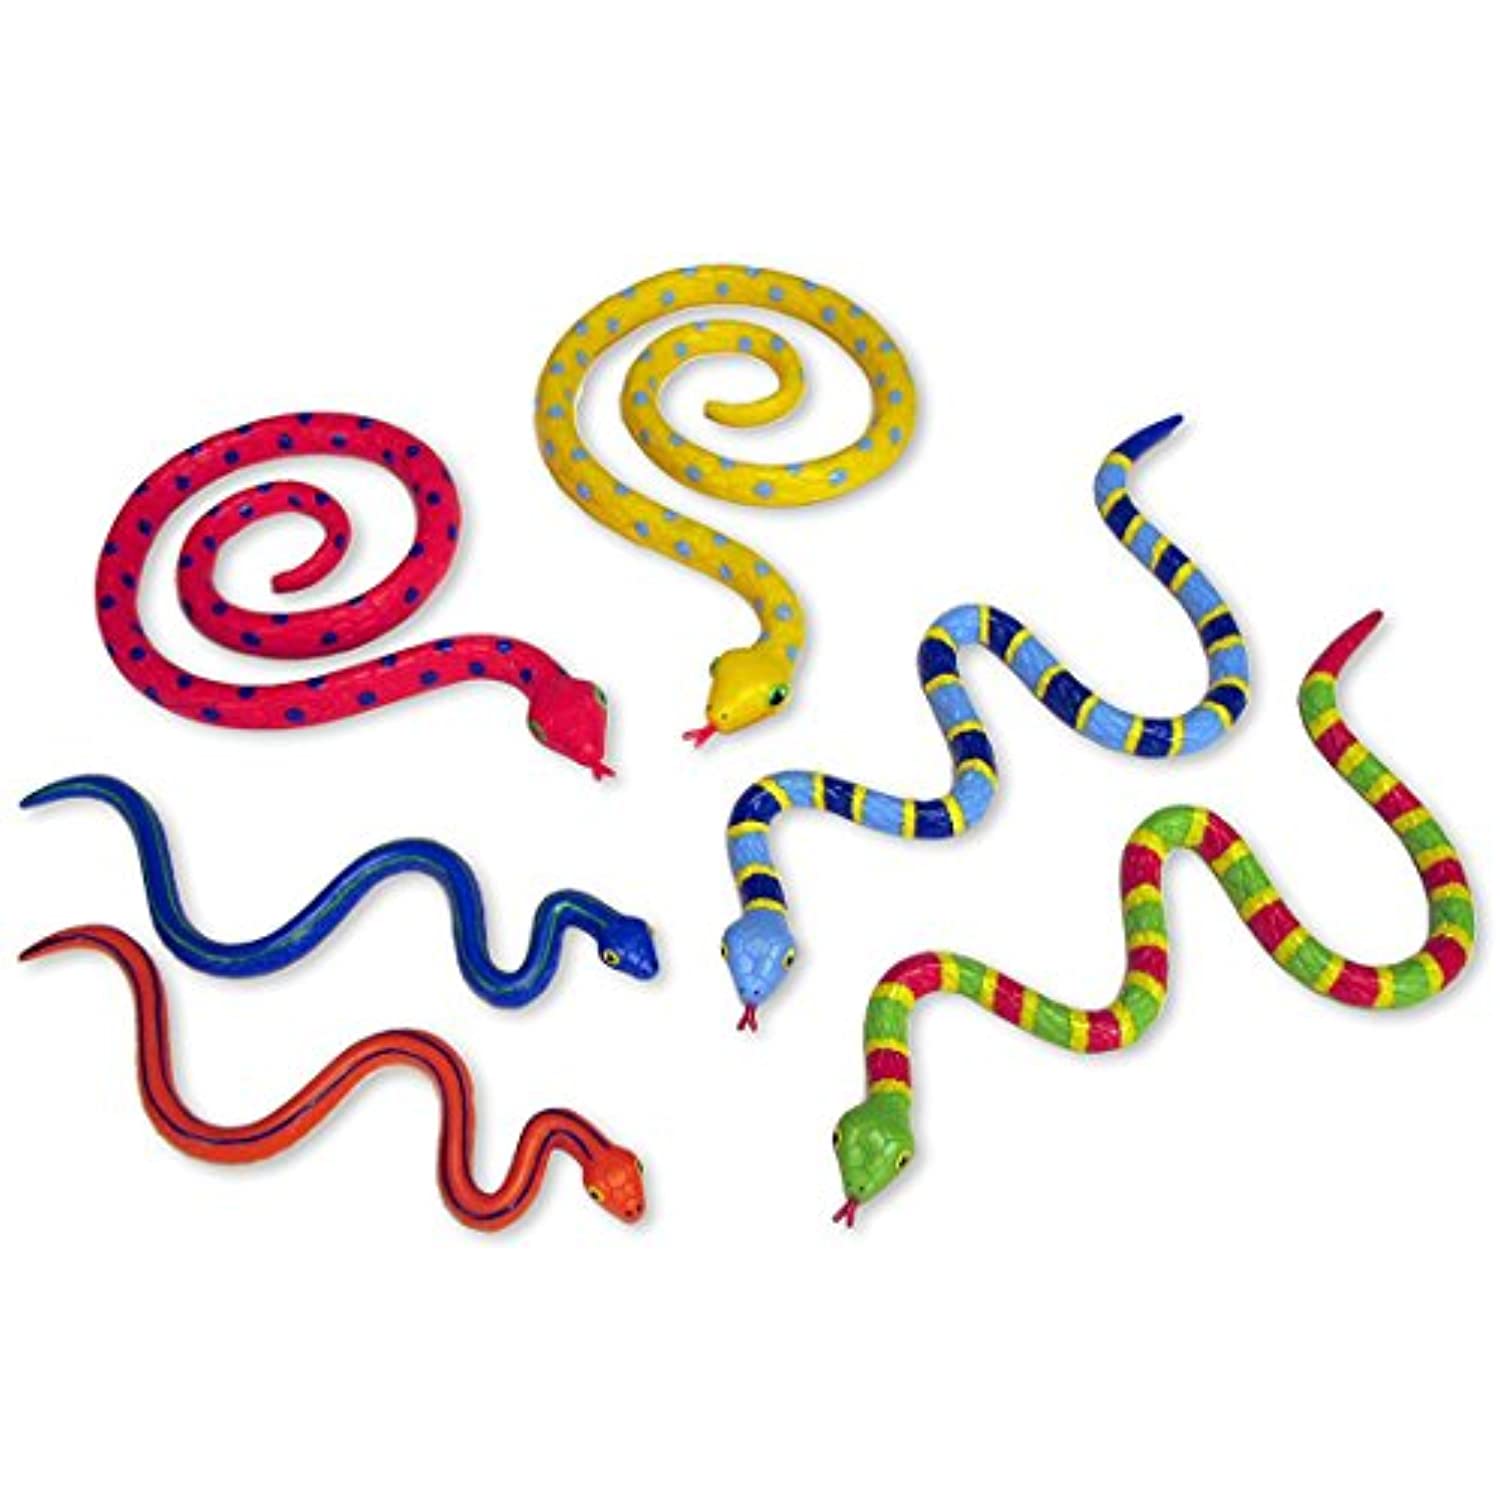 Melissa & Doug Sack of Snakes: Sunny Patch Outdoor Play Series + Free Scratch Art Mini-Pad Bundle